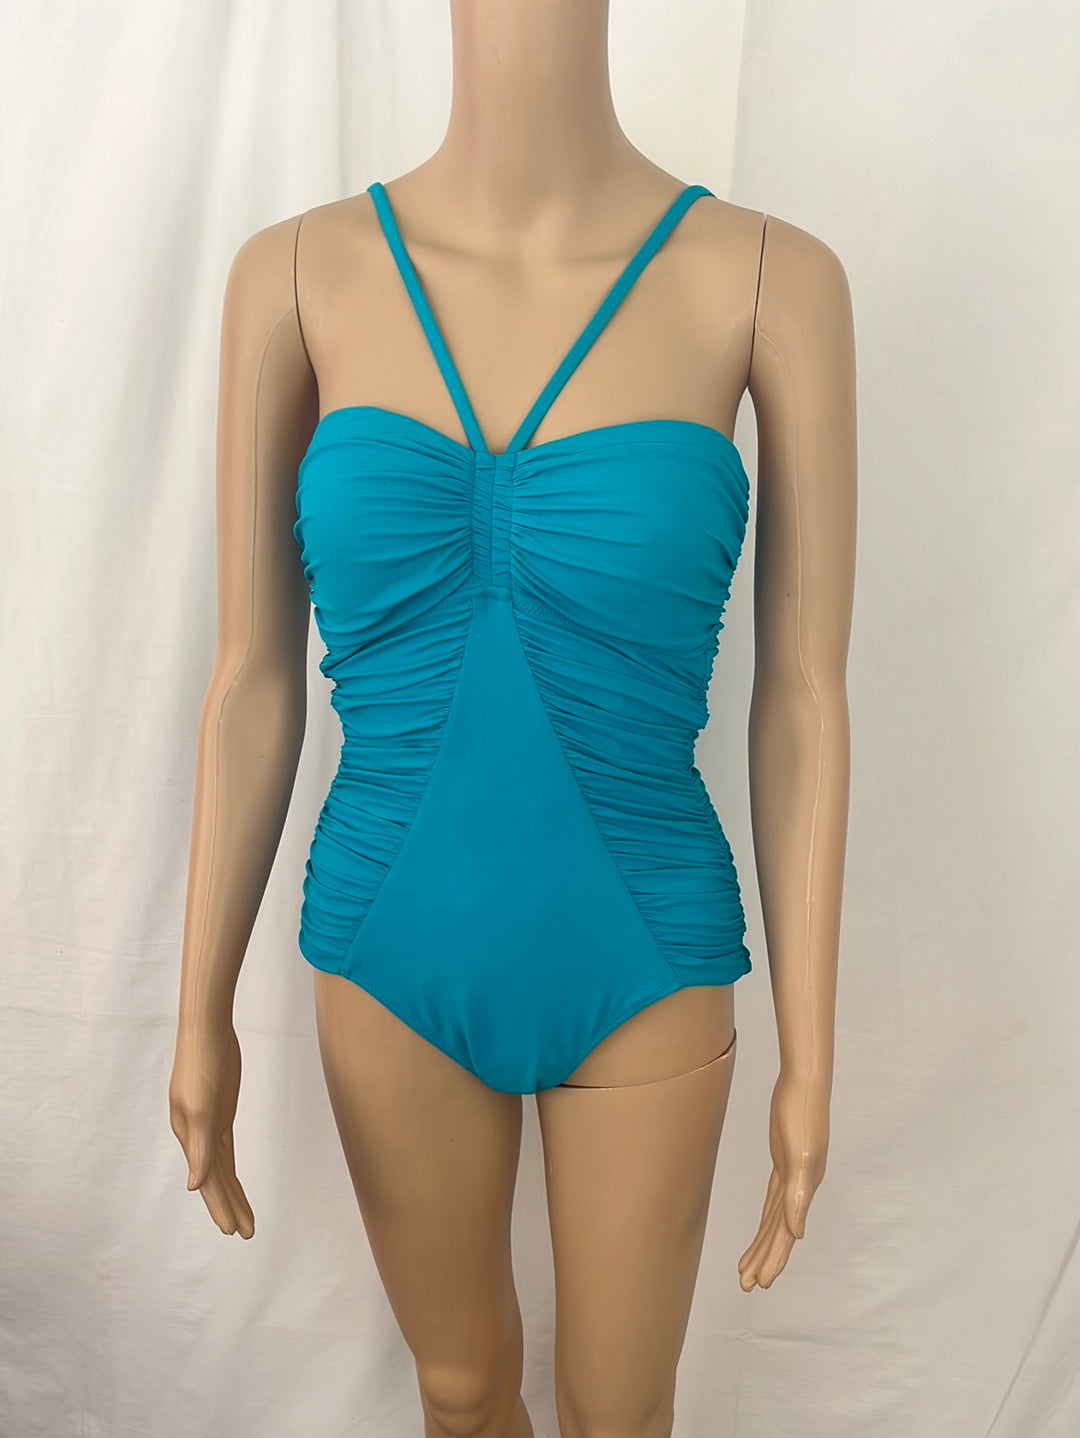 NWT -- PROFILE BY GOTTEX peacock blue Bandeau One-Piece Swimsuit -- 8